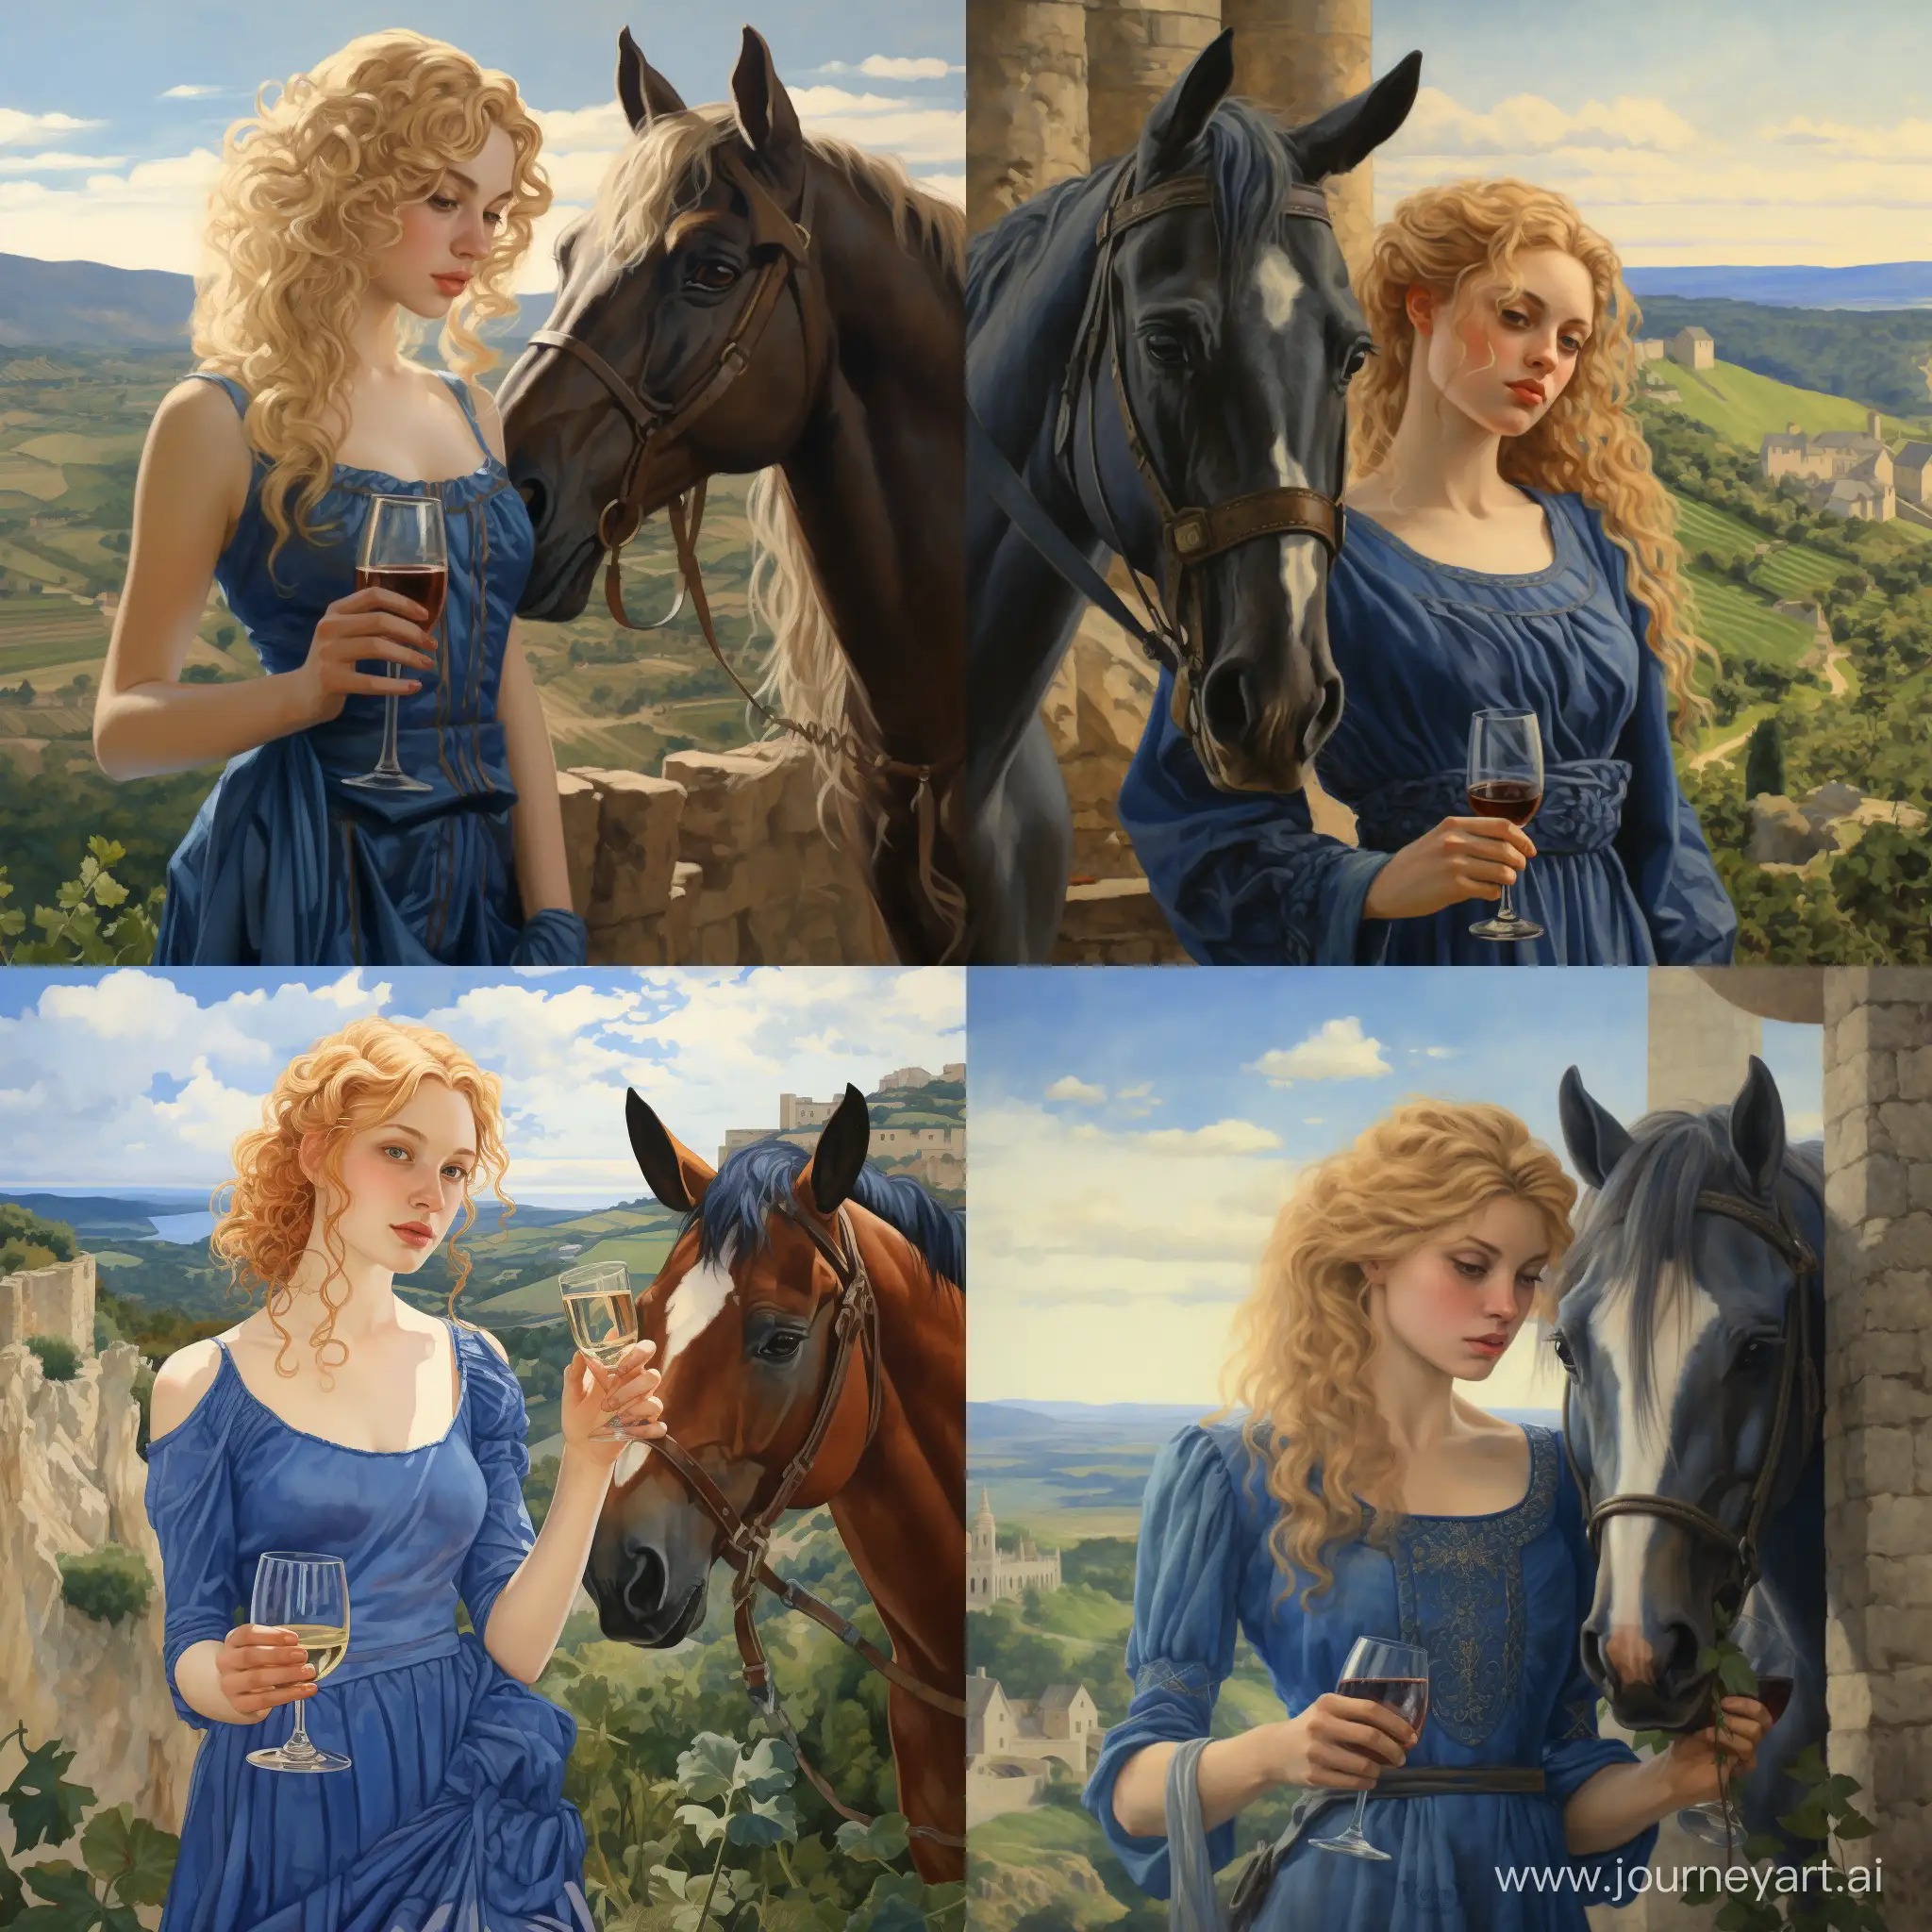 Blonde-CurlyHaired-Girl-in-Blue-Dress-overlooking-Vineyard-with-Horse